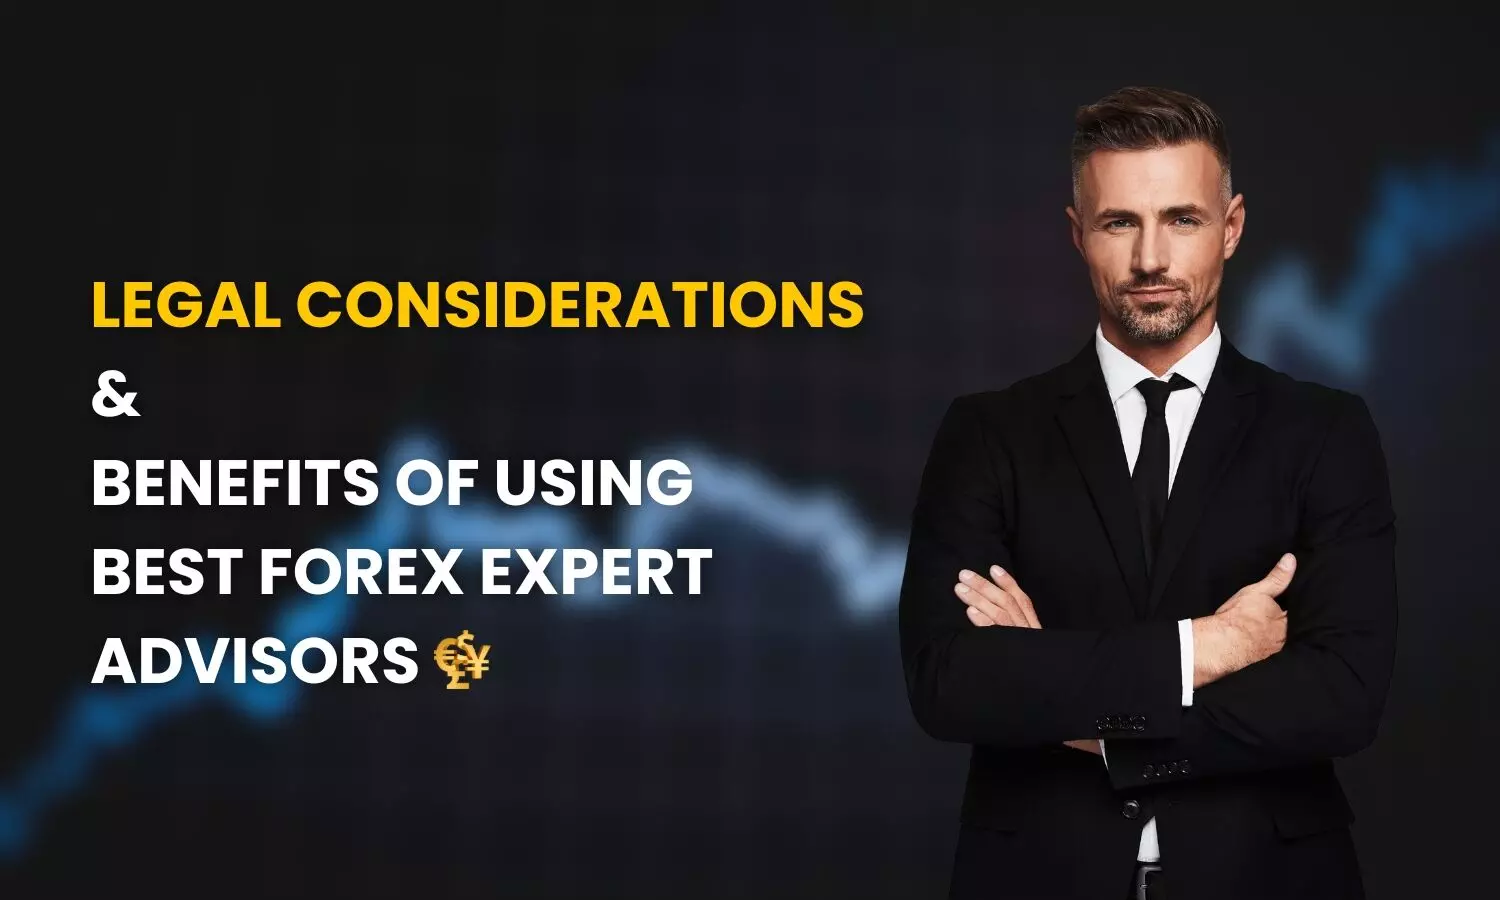 Legal Considerations and Benefits of Using the Best Forex Expert Advisors